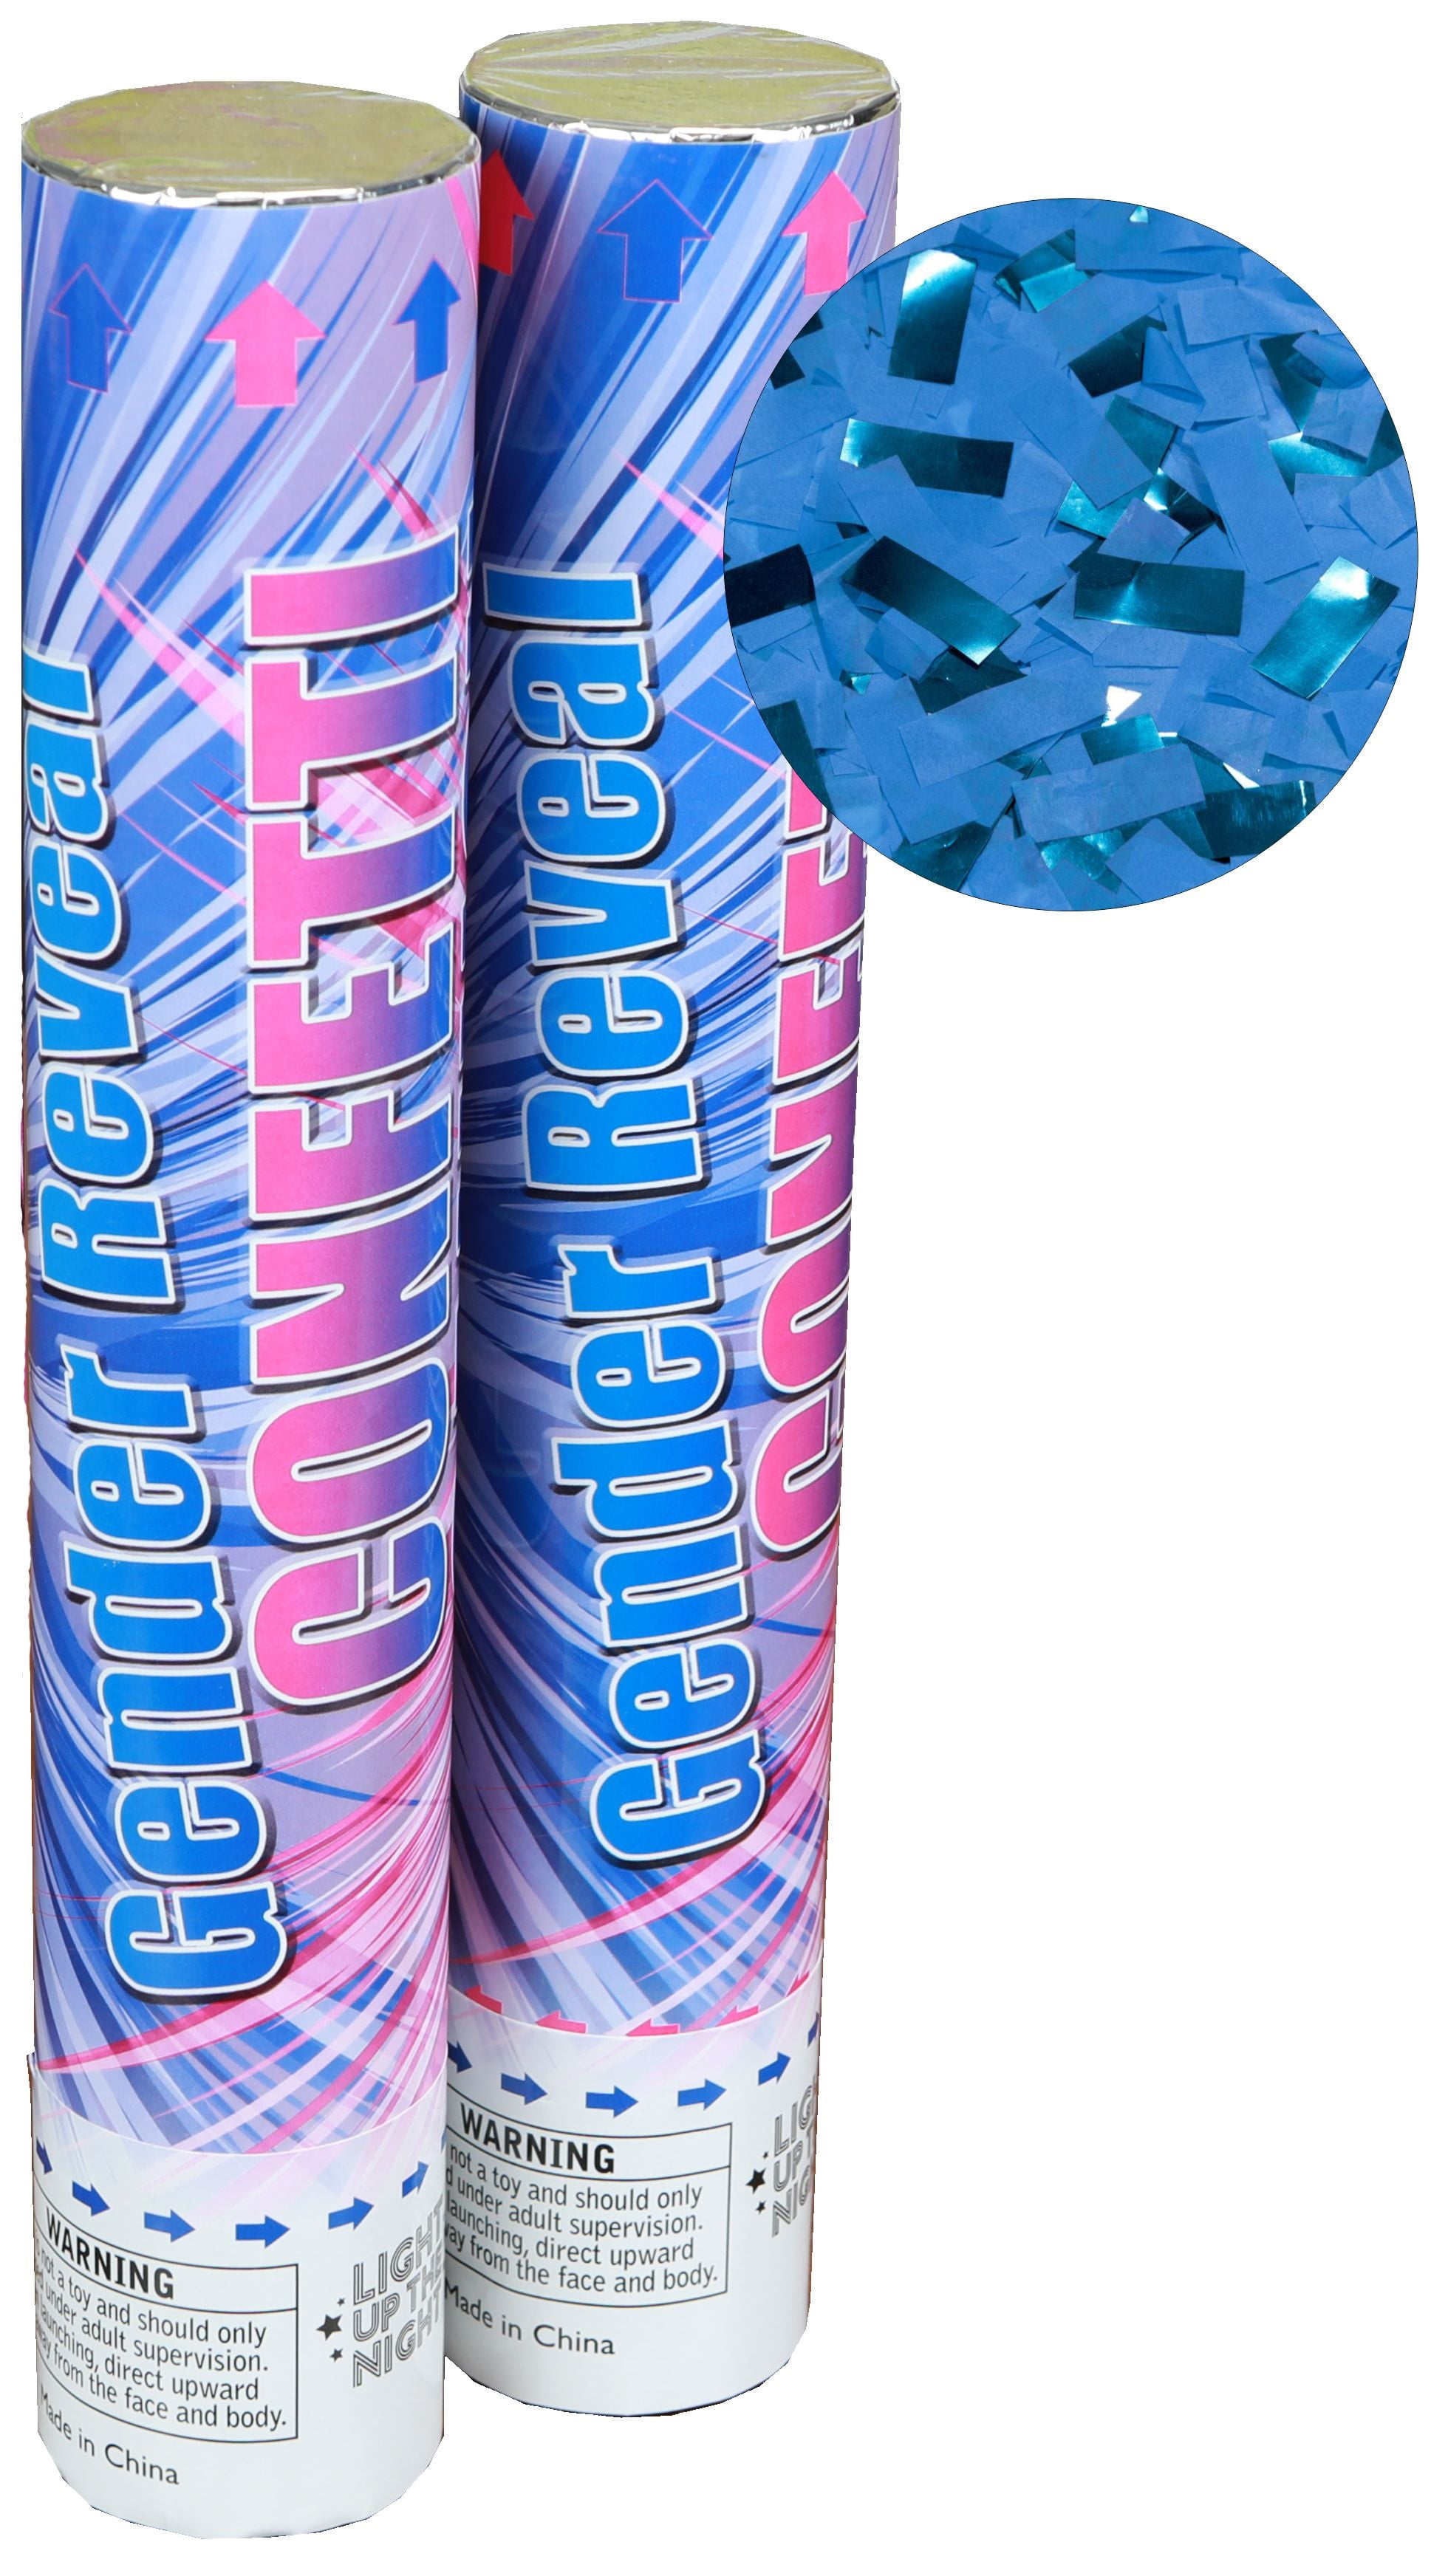 NEW 2 x BABY SHOWER GENDER REVEAL CONFETTI SHOOTER CANNON PINK BLUE POPPER PARTY 